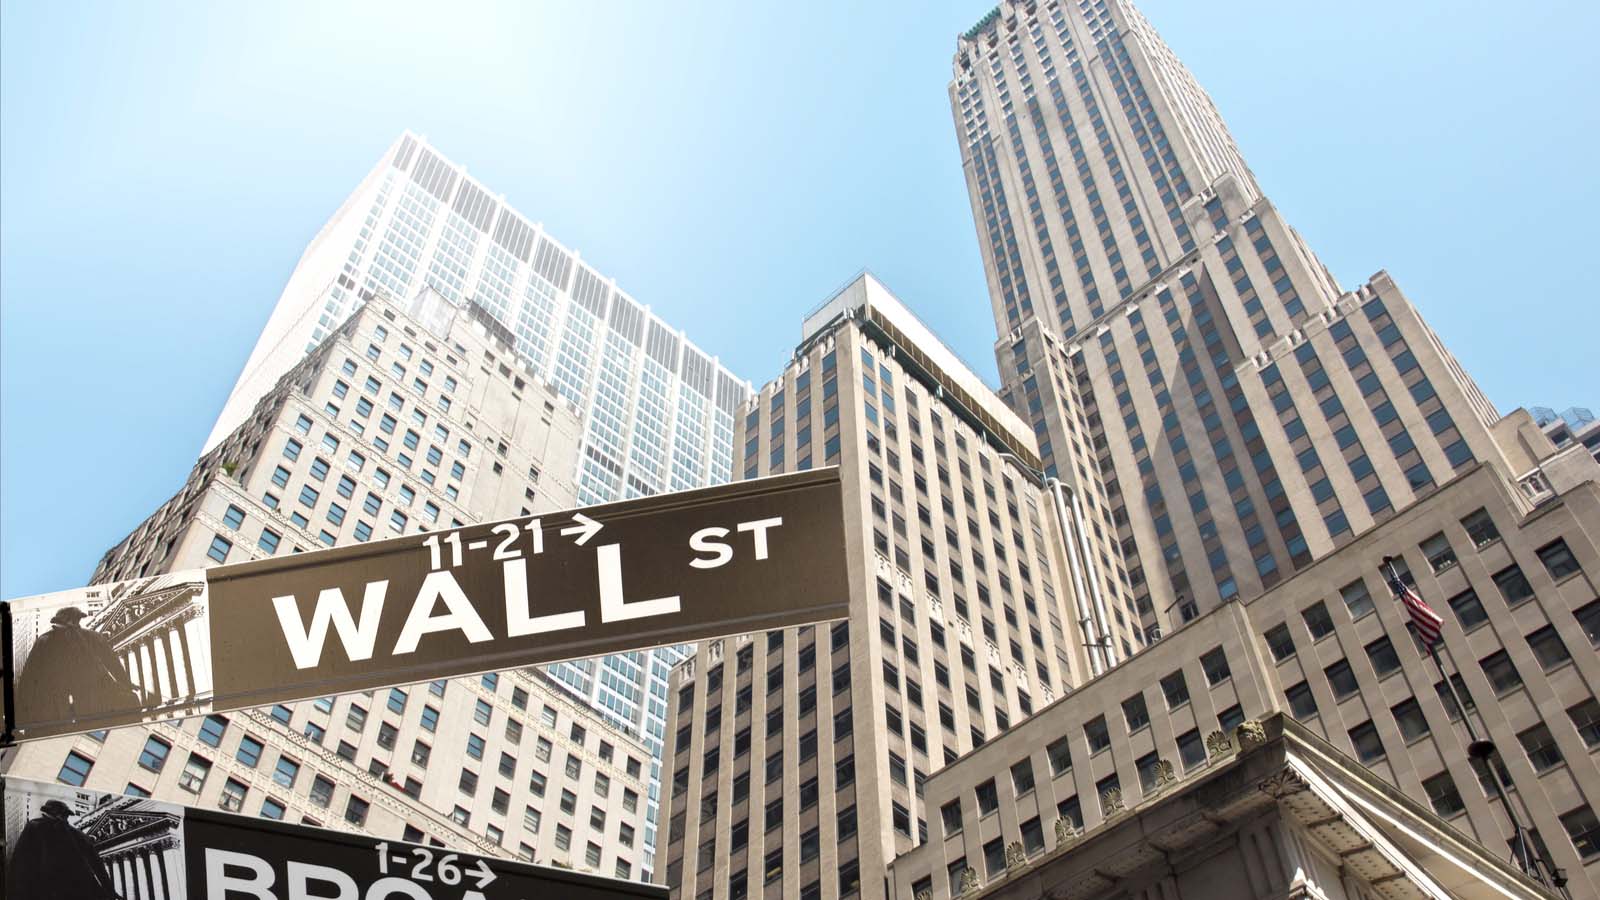 top stocks: skyscraper buildings viewed from the ground with Wall Street street sign in the foreground (Stock Market Recap)